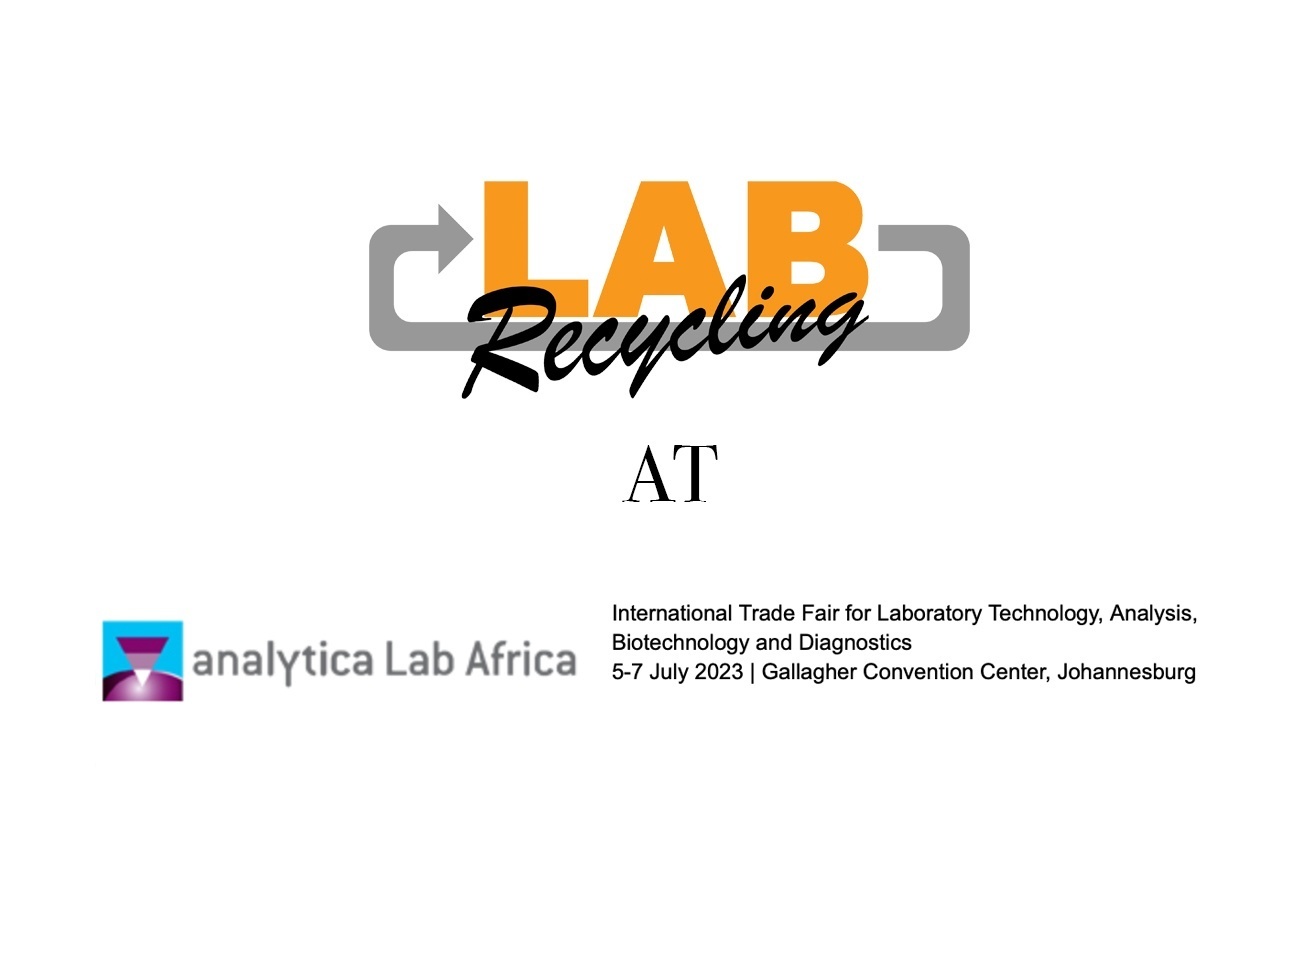 Labrecycling is attending Analytica Africa